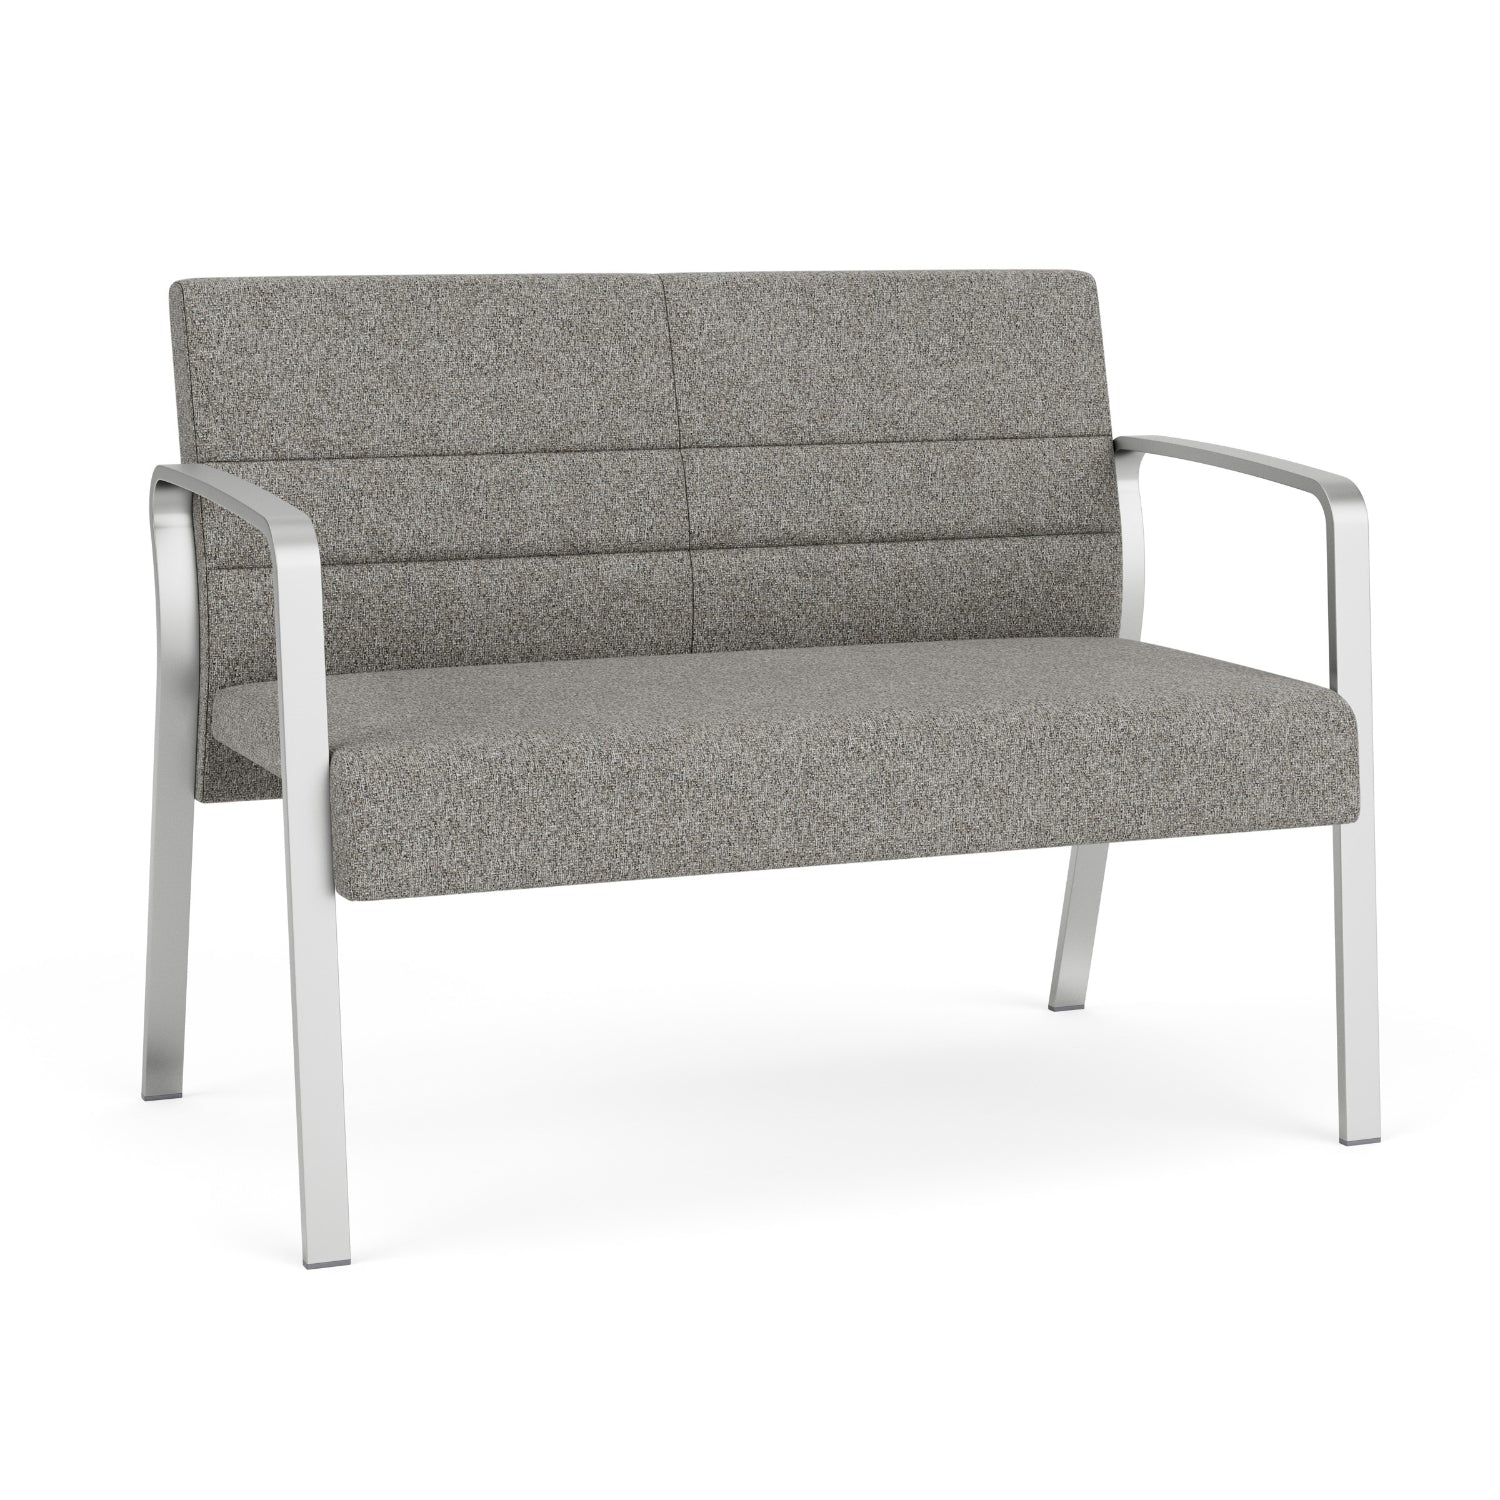 Waterfall Collection Reception Seating, Loveseat, Leg Base, 550 lb. Capacity, Standard Fabric Upholstery, FREE SHIPPING